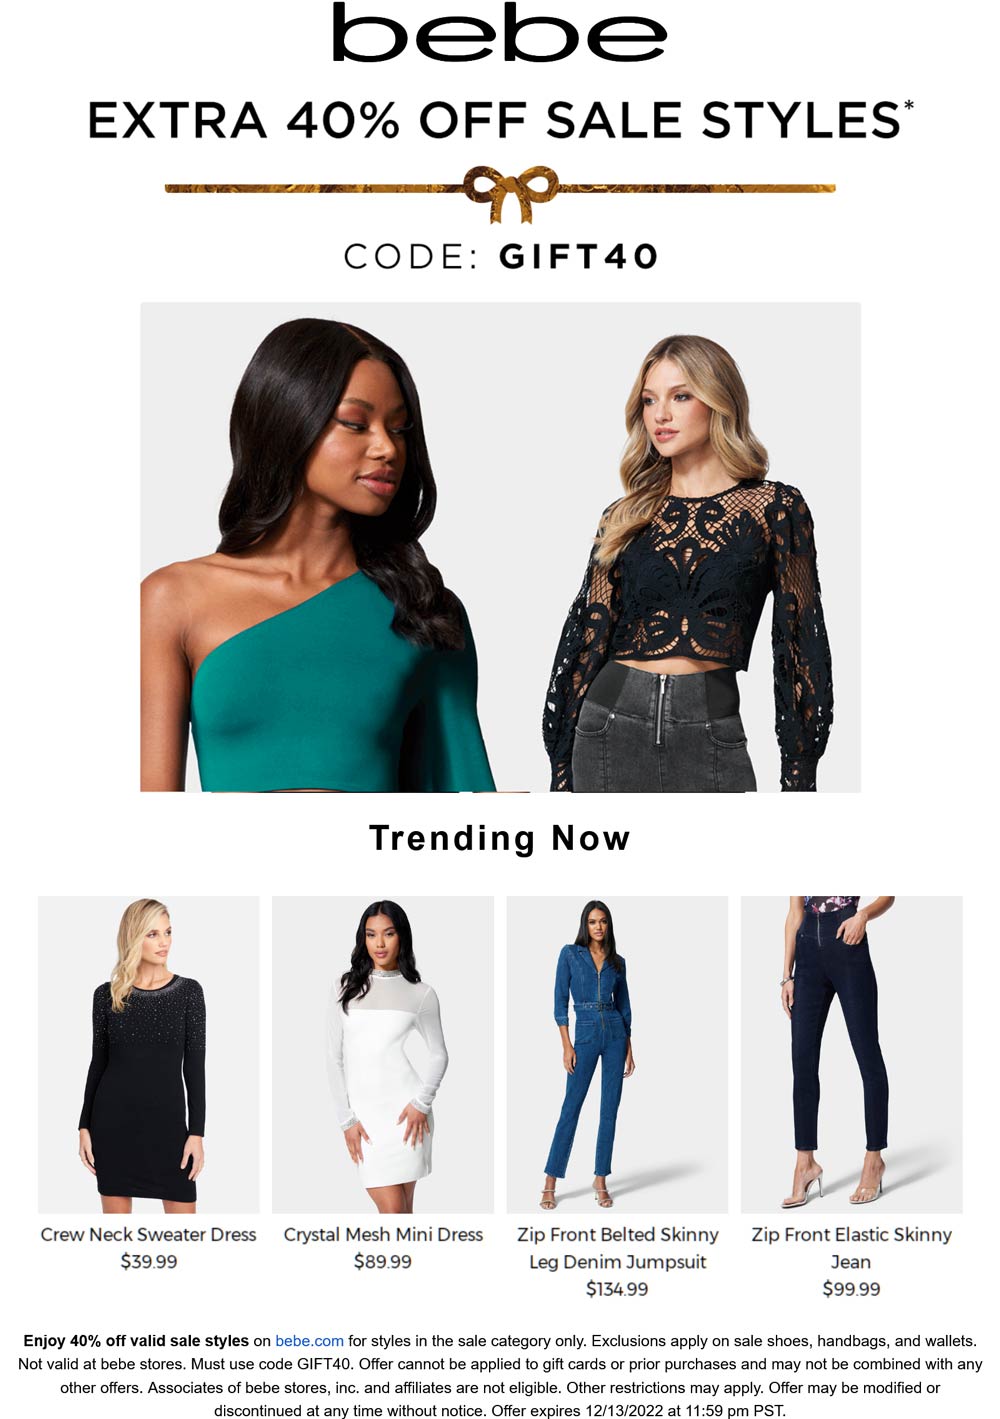 bebe stores Coupon  Extra 40% off sale items online at bebe via promo code GIFT40 #bebe 